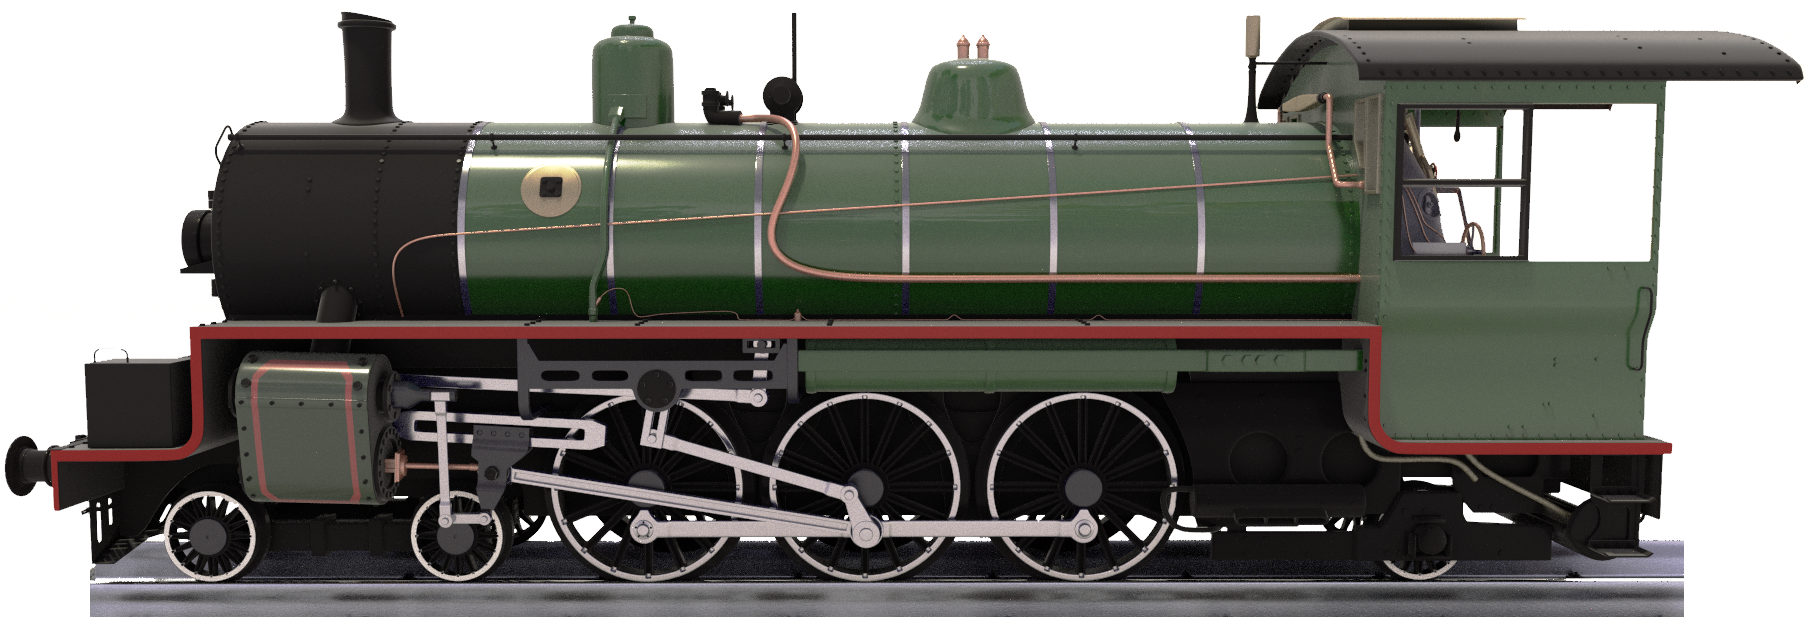 Railway Train PNG Pic Background